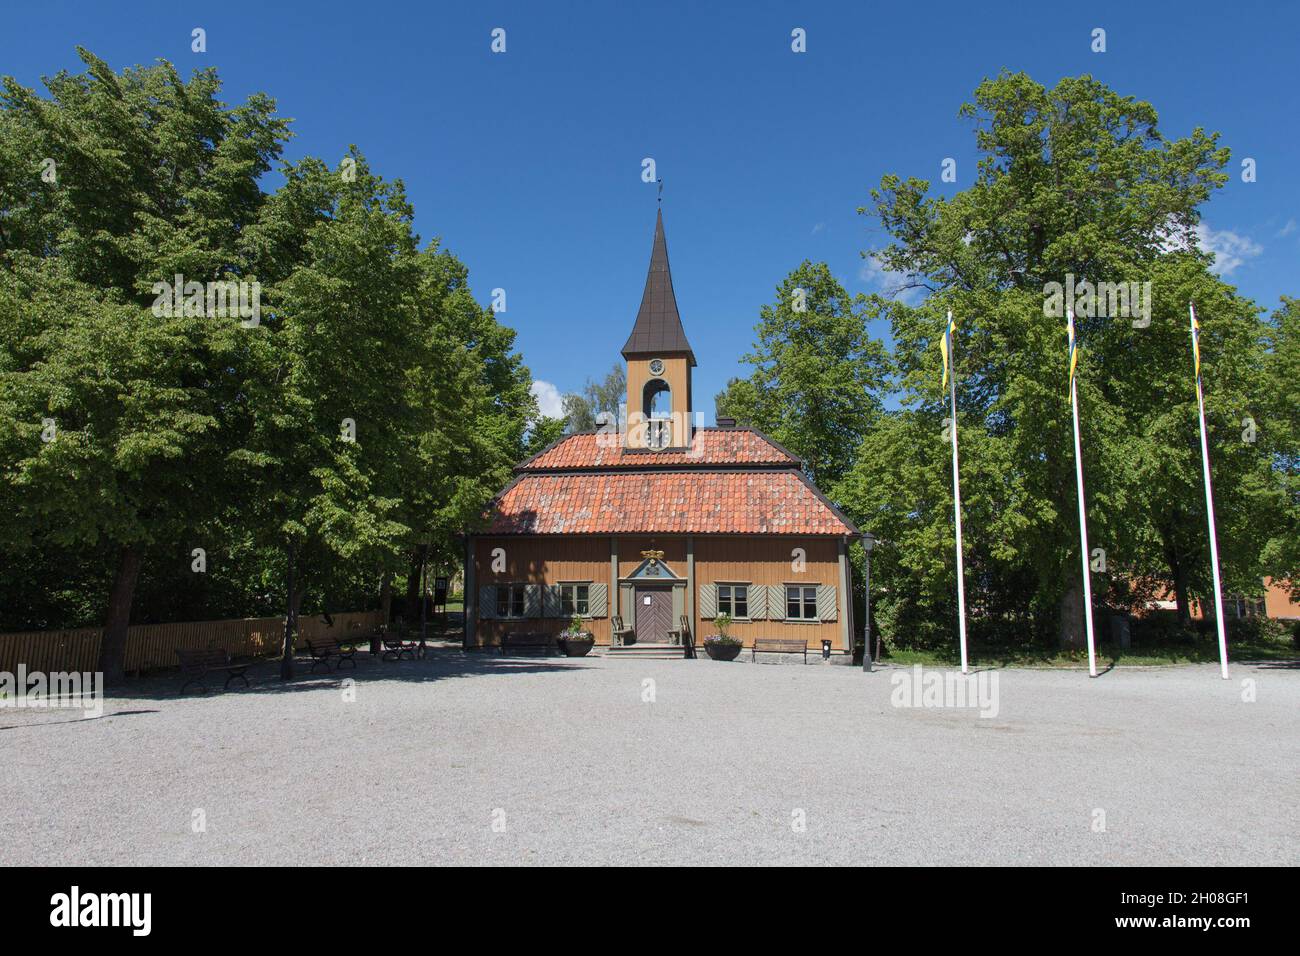 Sweden, Sigtuna - May 31 2019: exterior view of Sigtuna Town Hall in a sunny day on May 31 2019 in Sigtuna, Sweden. Stock Photo